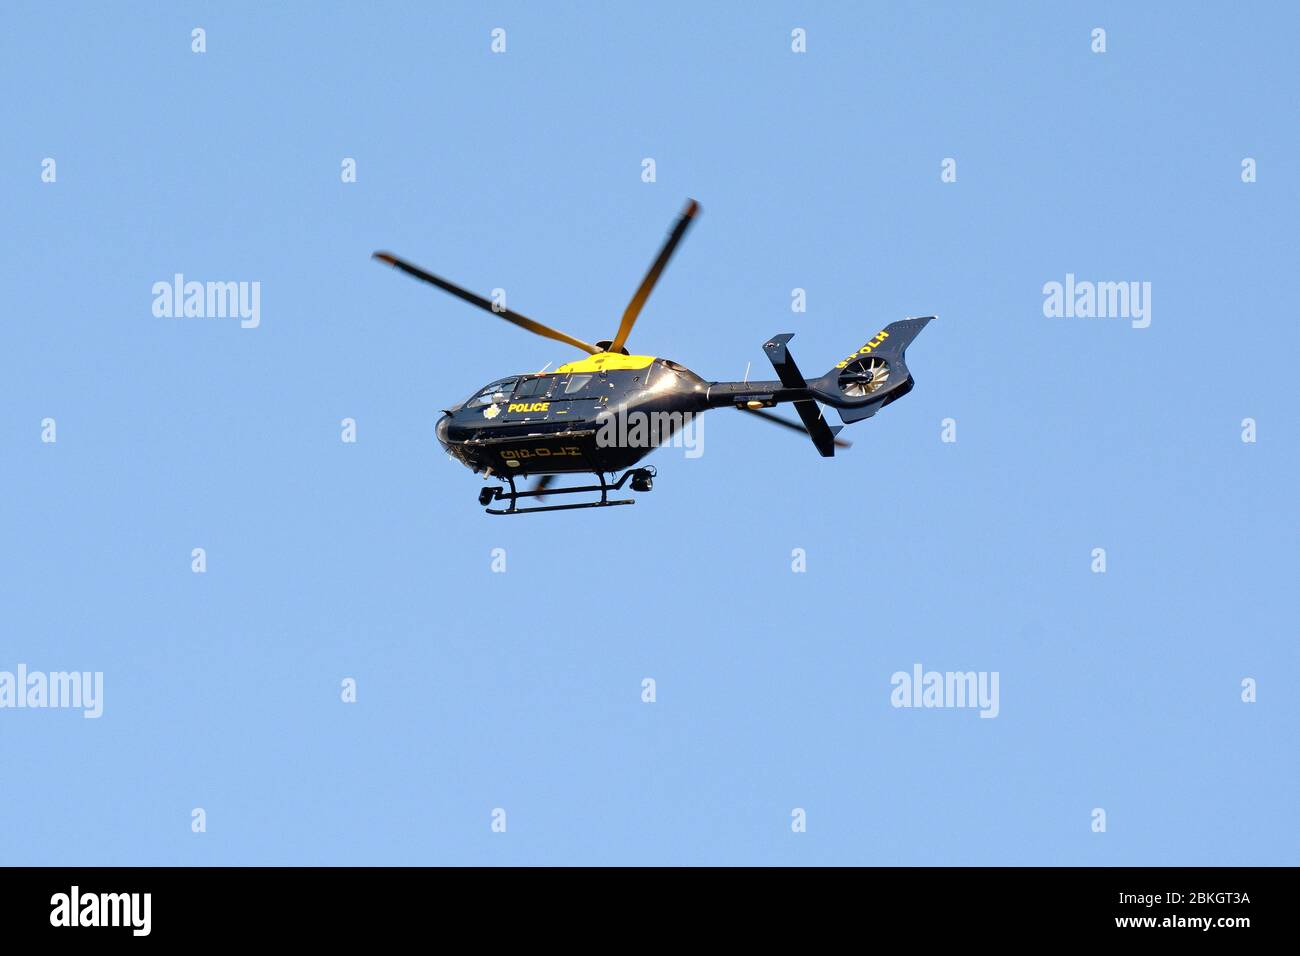 A National Police Air Service helicopter hovering above against a clear blue sky Stock Photo